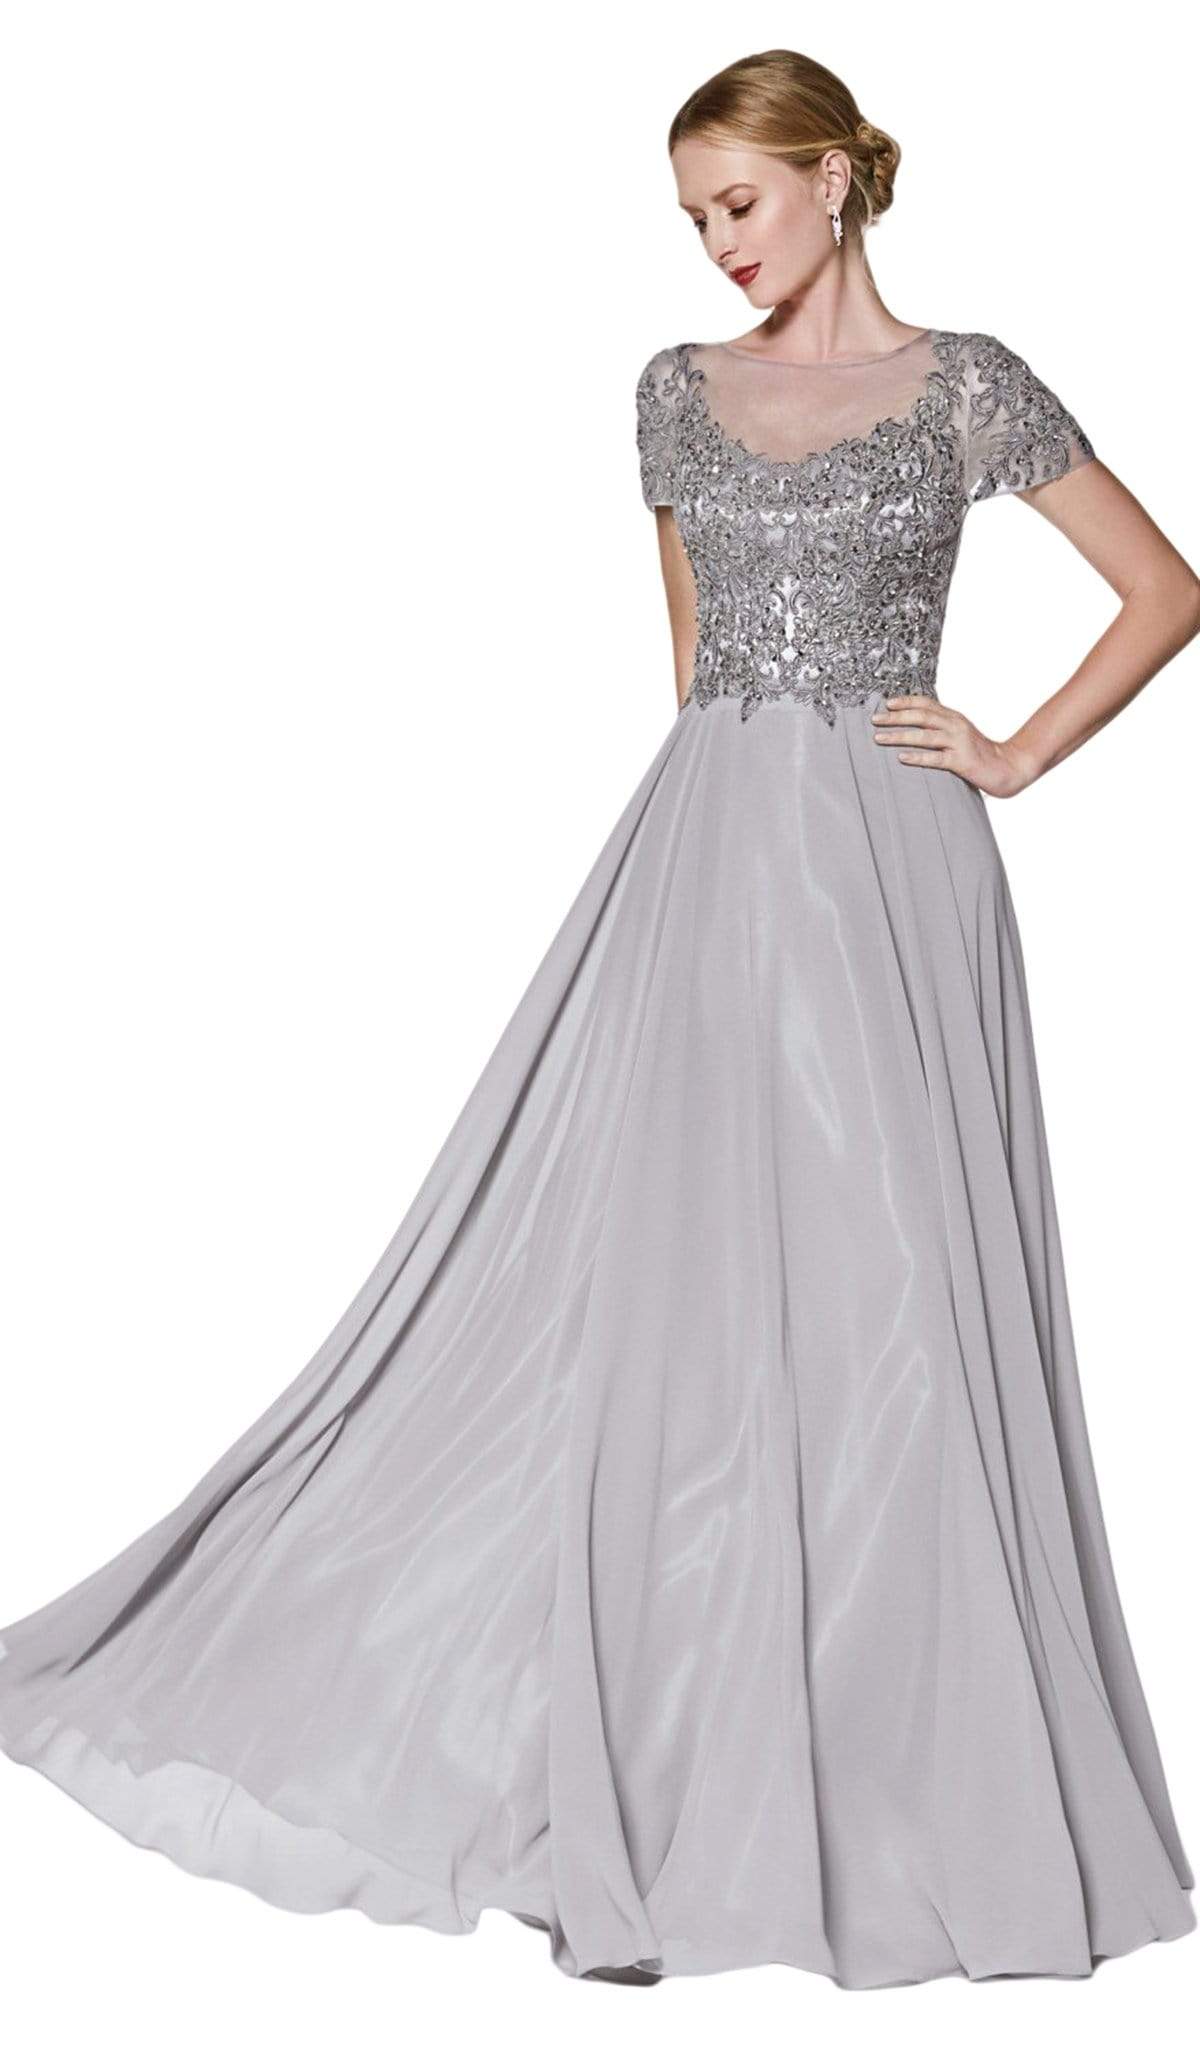 Cinderella Divine - CD0139 Short Sleeve Appliqued Illusion A-Line Gown In Silver and Gray